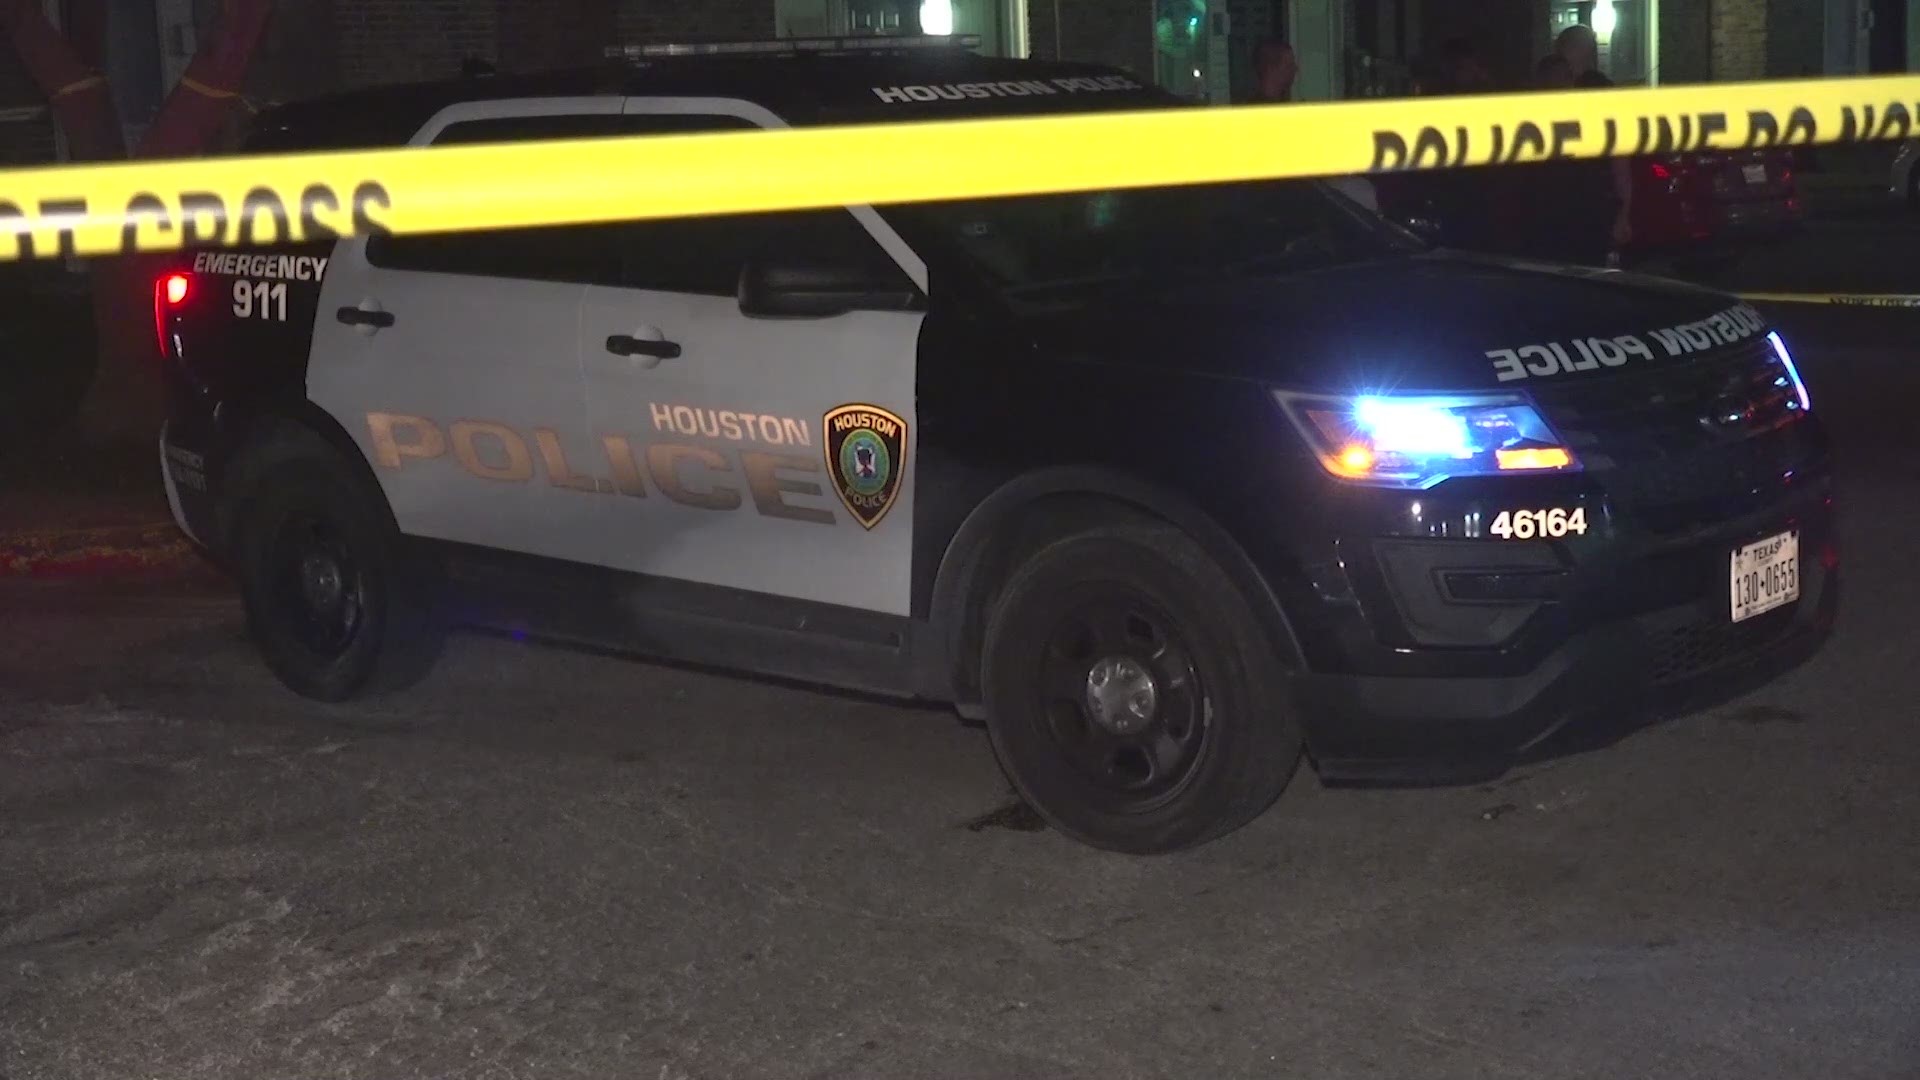 A man is dead after he was shot by Houston police at an apartment complex in Houston's southside. Police said the man pointed a pistol at them, and in fear of their life, they shot him.